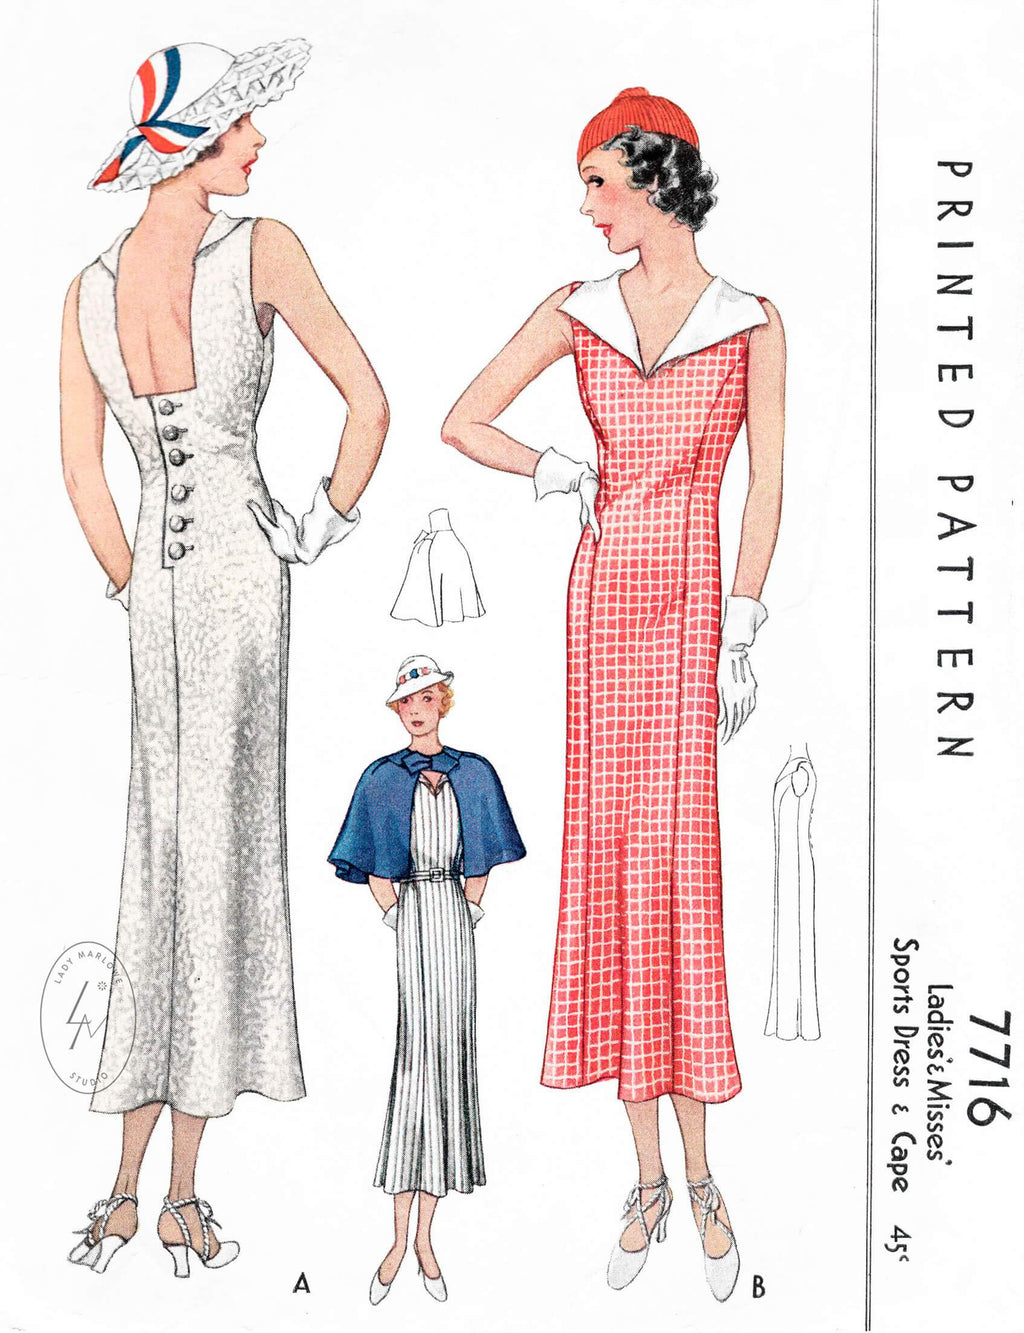 McCall 7716 1930s 1934 sports dress princess seams pointed collar flounce capelet vintage sewing pattern reproduction